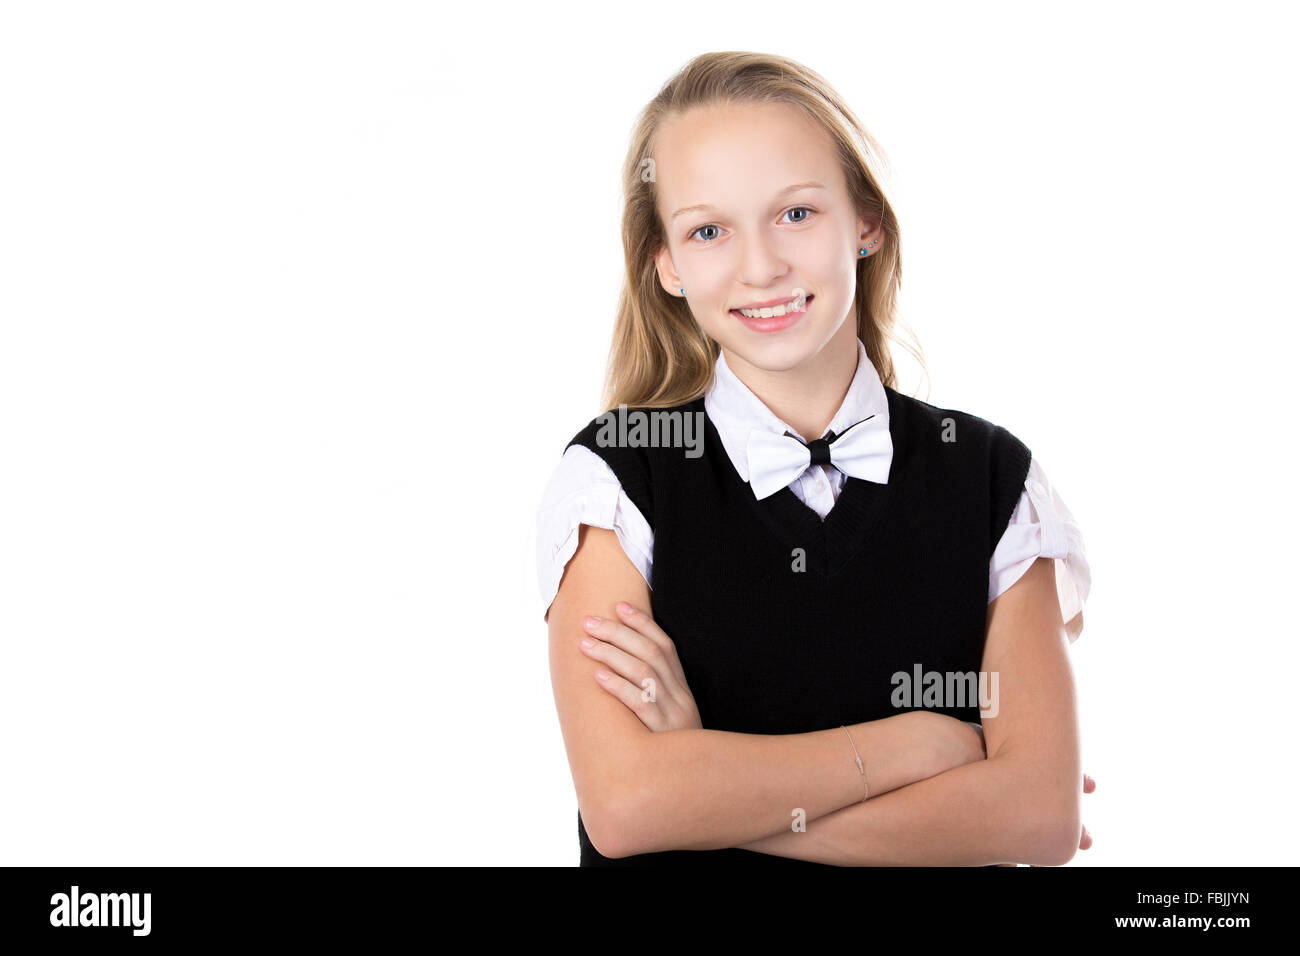 Portrait of happy cute beautiful blond schoolgirl wearing black and white formal outfit and bow tie, holding arms folded Stock Photo